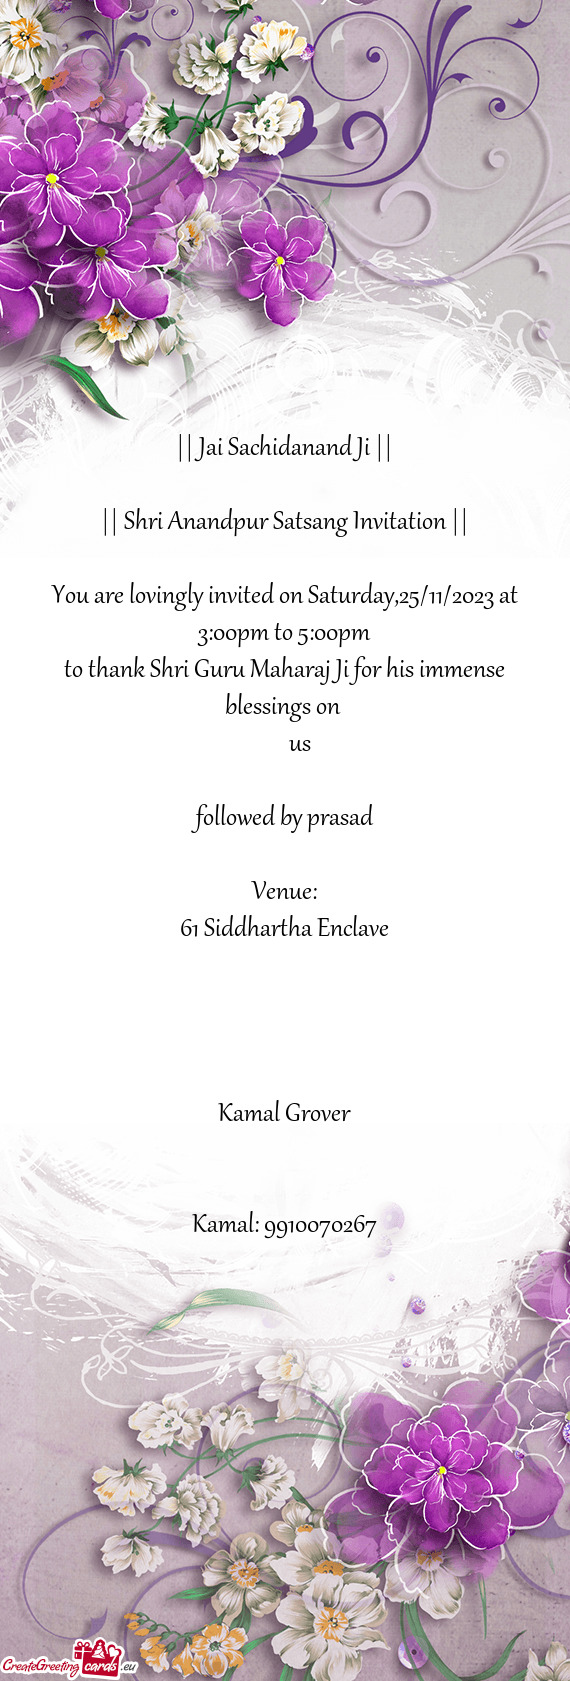 You are lovingly invited on Saturday,25/11/2023 at 3:00pm to 5:00pm